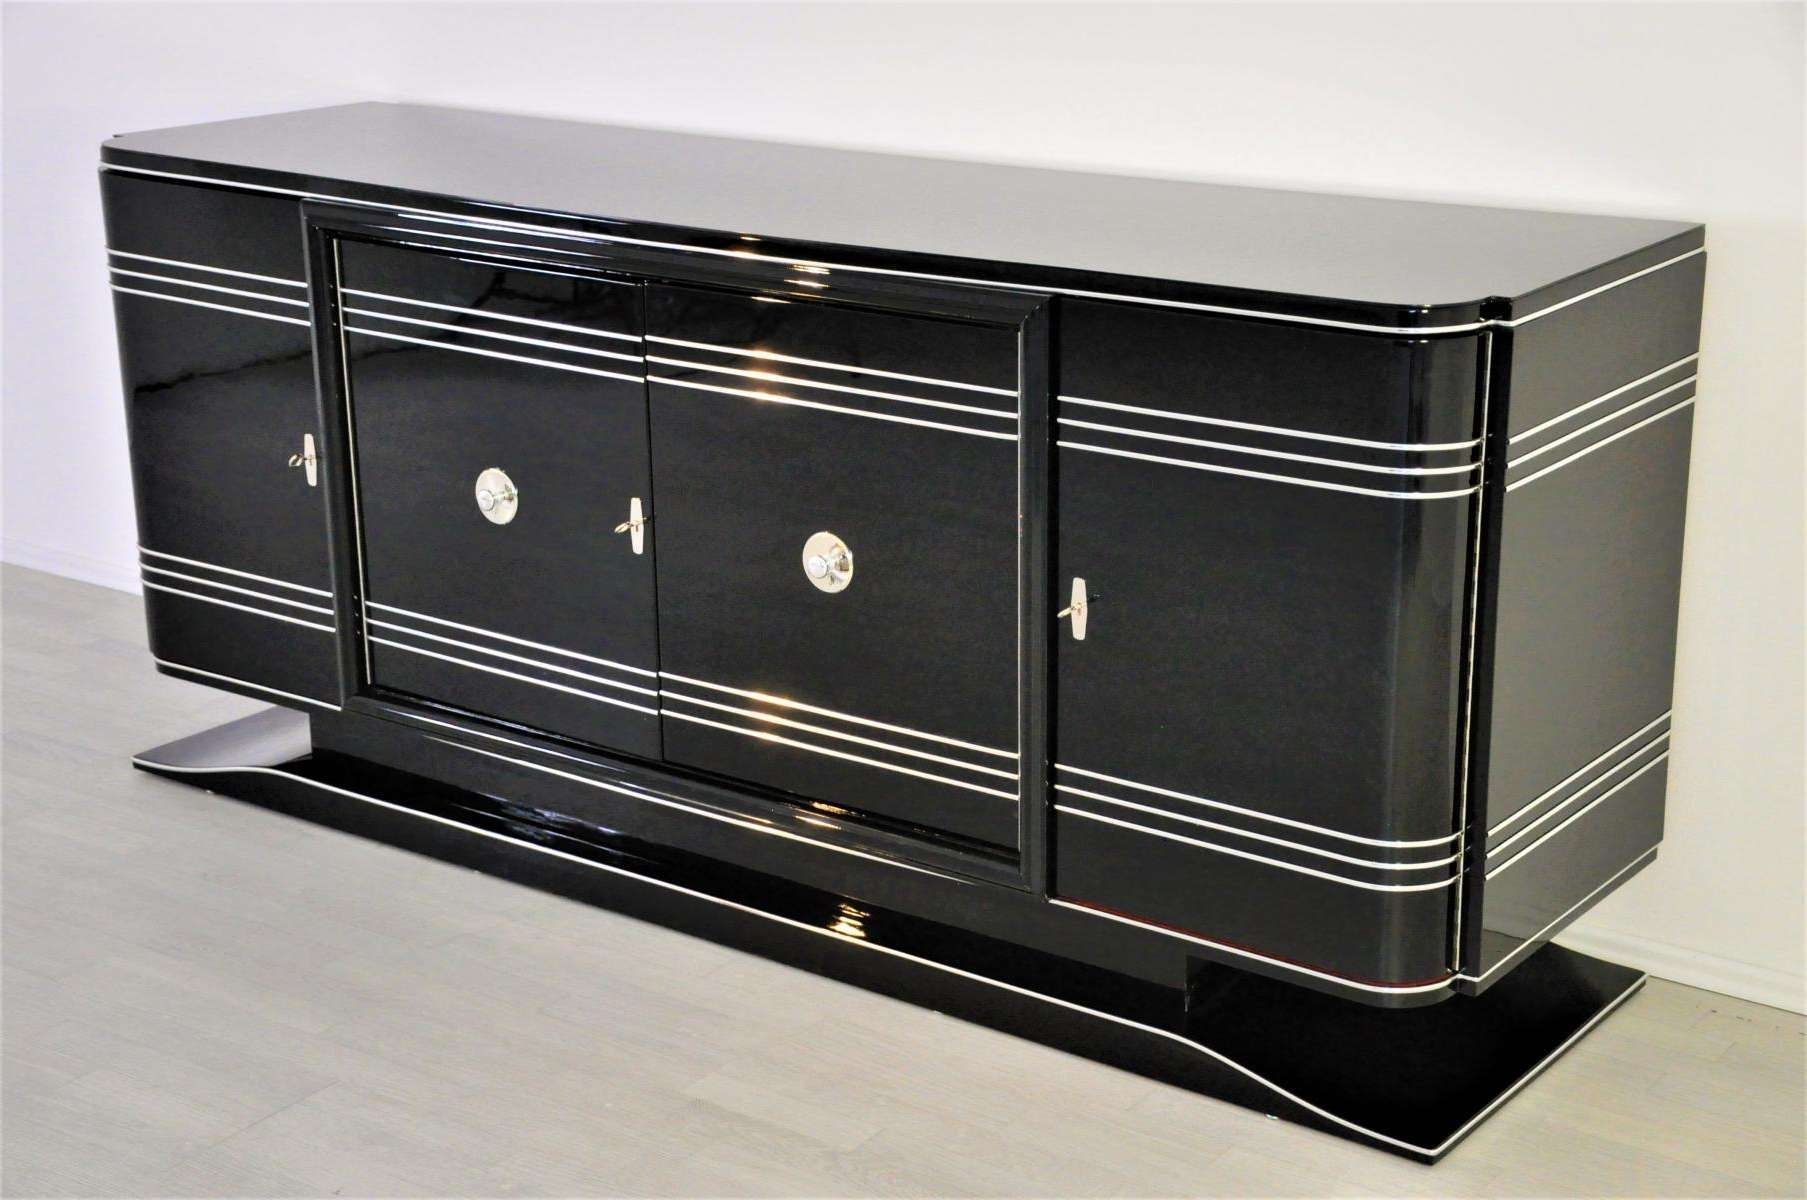 Large Art Deco Sideboard With Red Bar Compartment For Sale At Pamono With Art Deco Sideboards (View 9 of 20)